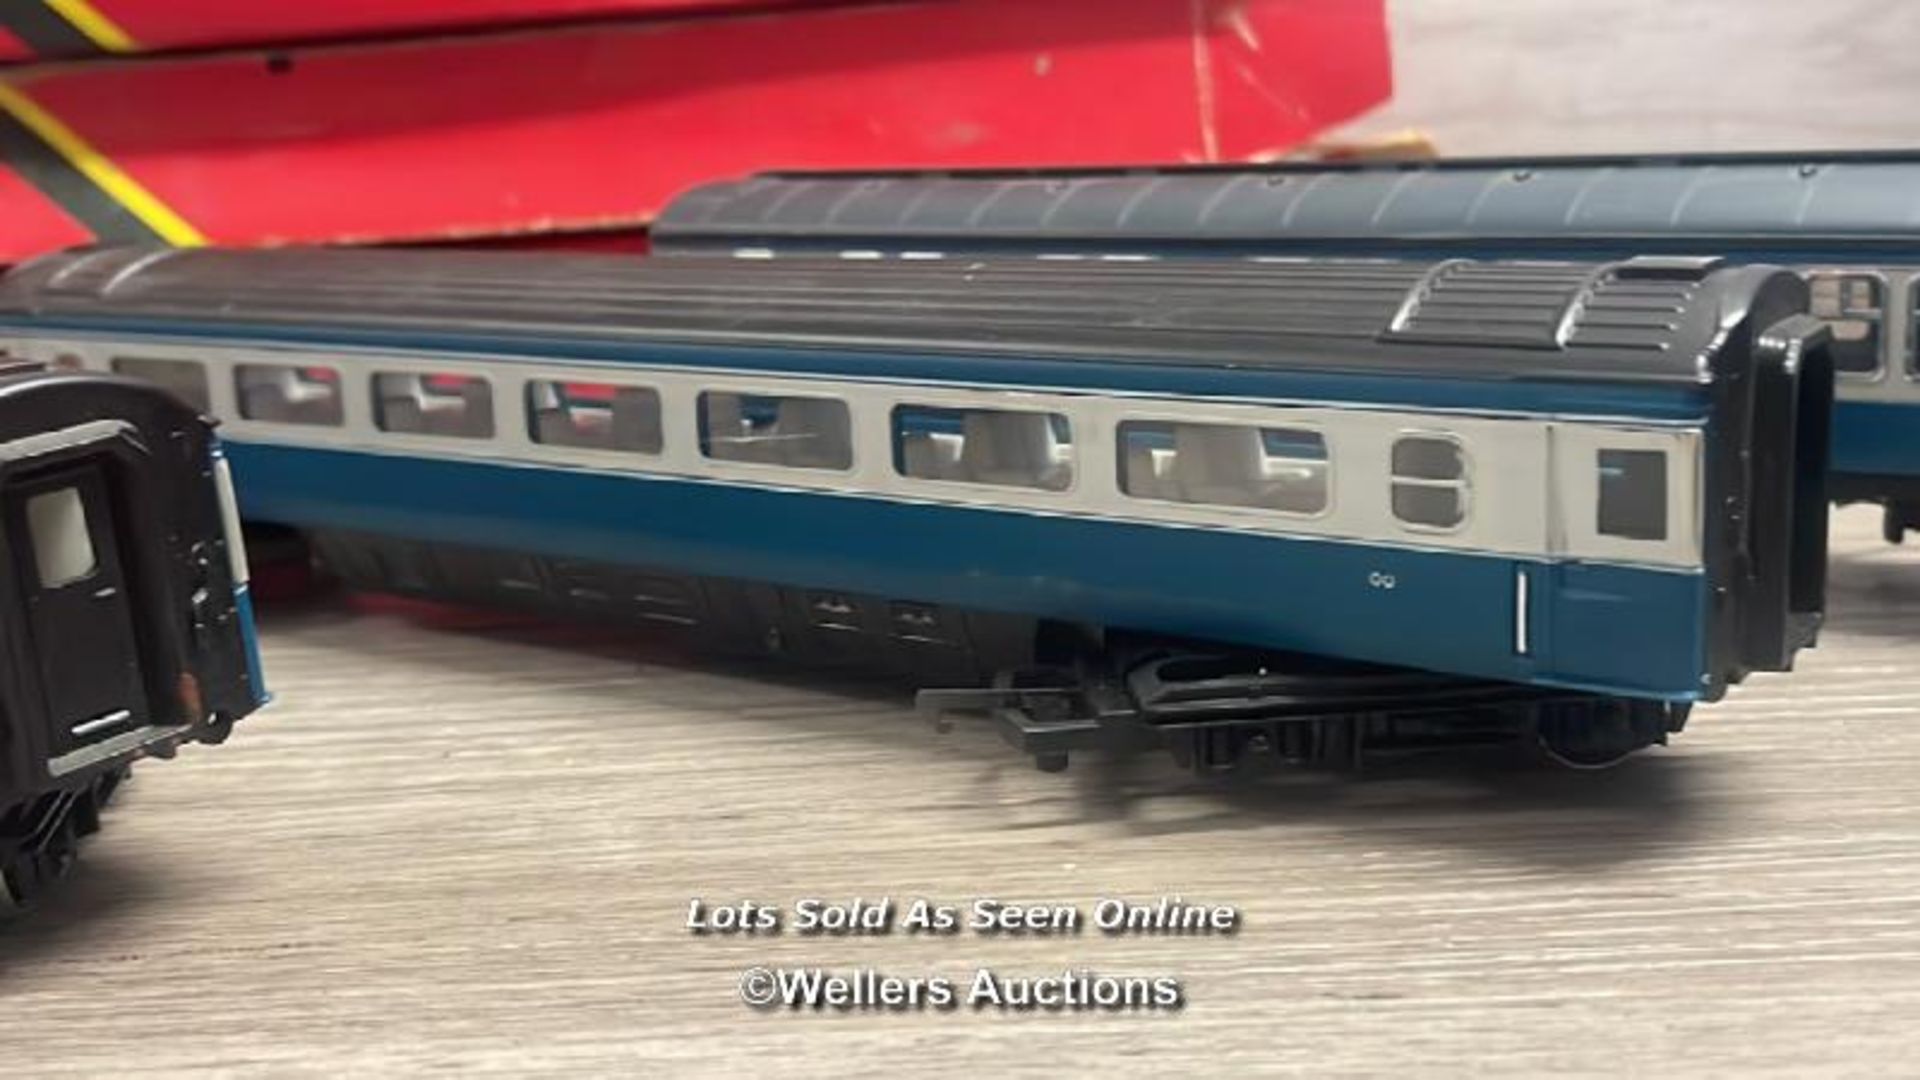 THREE HORNBY 00 GAUGE SCALE MODEL TRAIN COACHES - Image 3 of 6